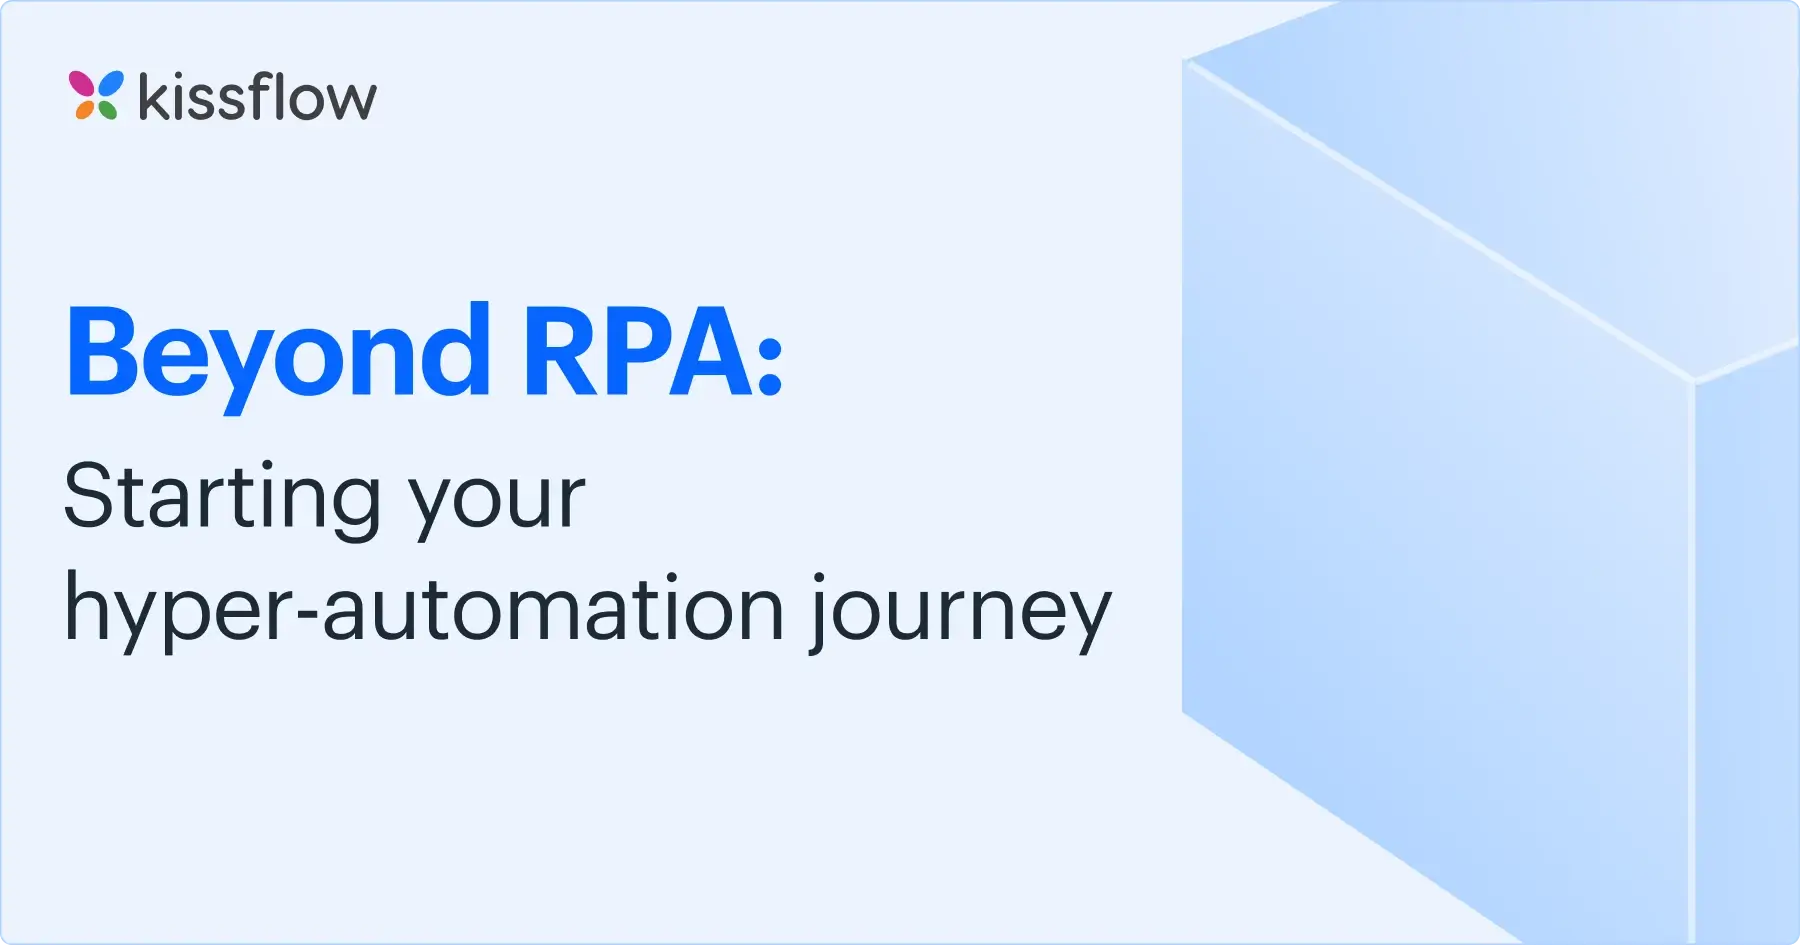 Beyond RPA: Starting your hyper-automation journey